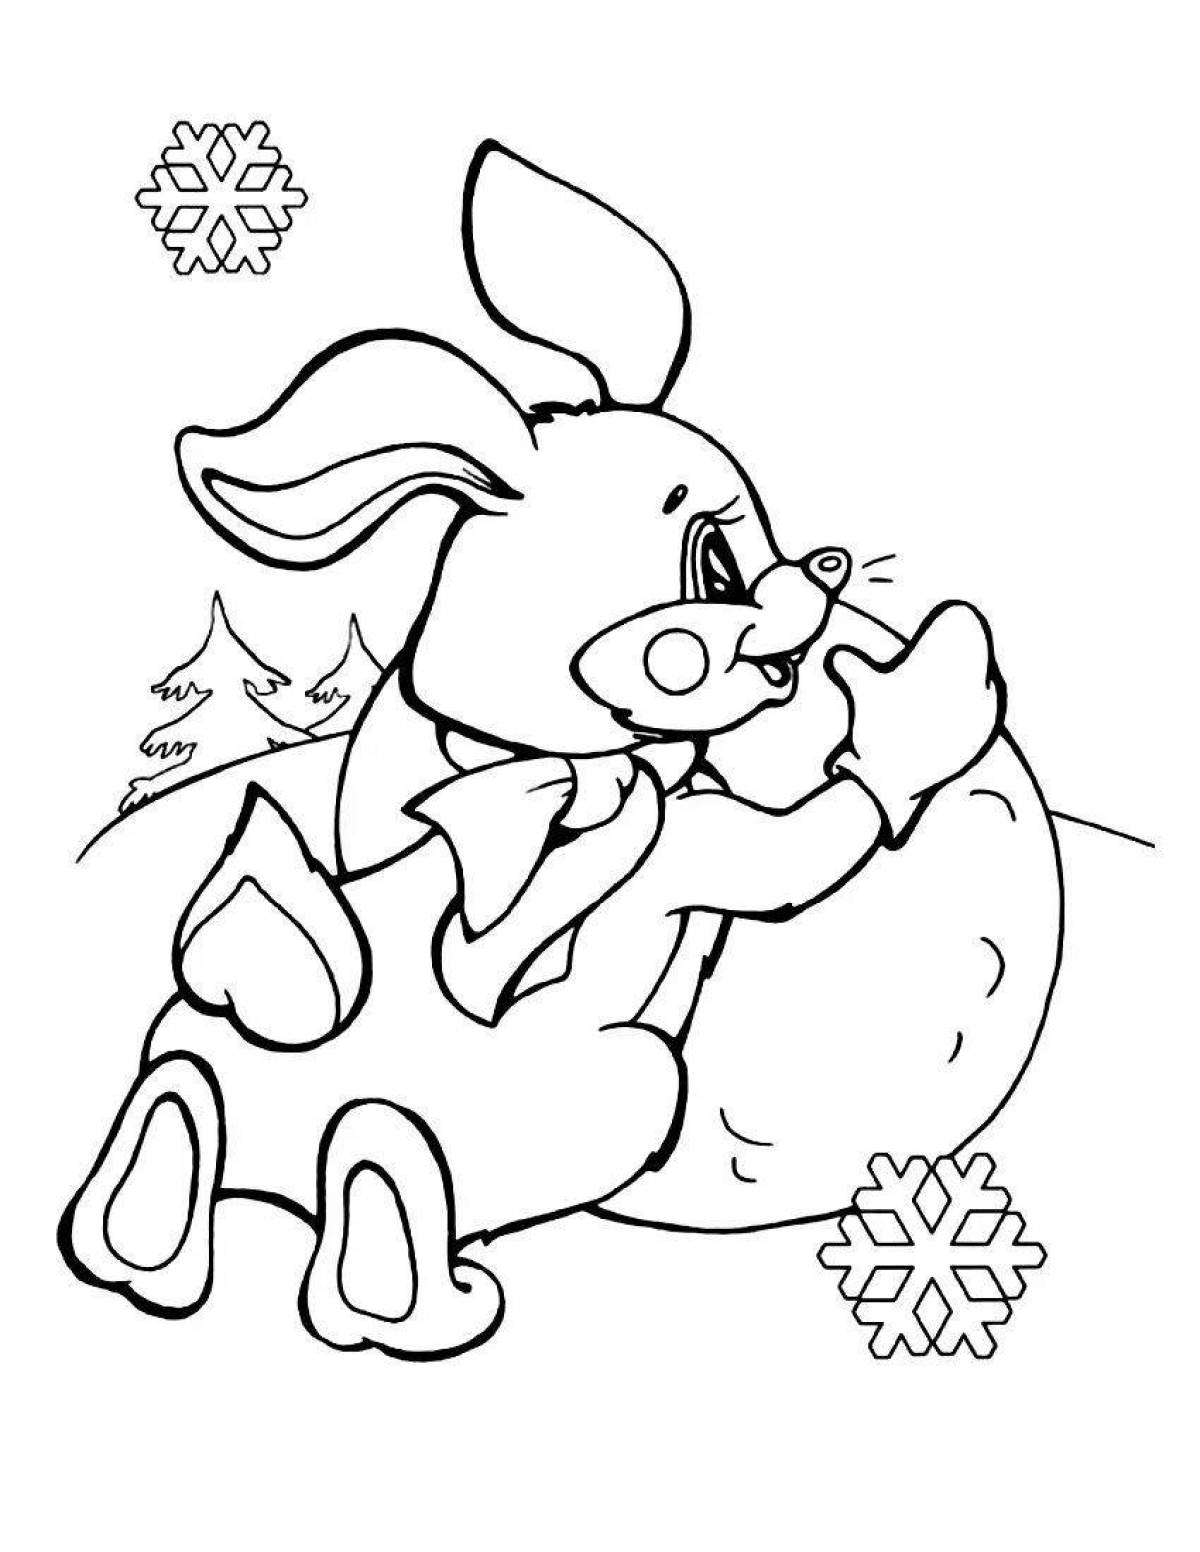 Fun coloring book frost and hare